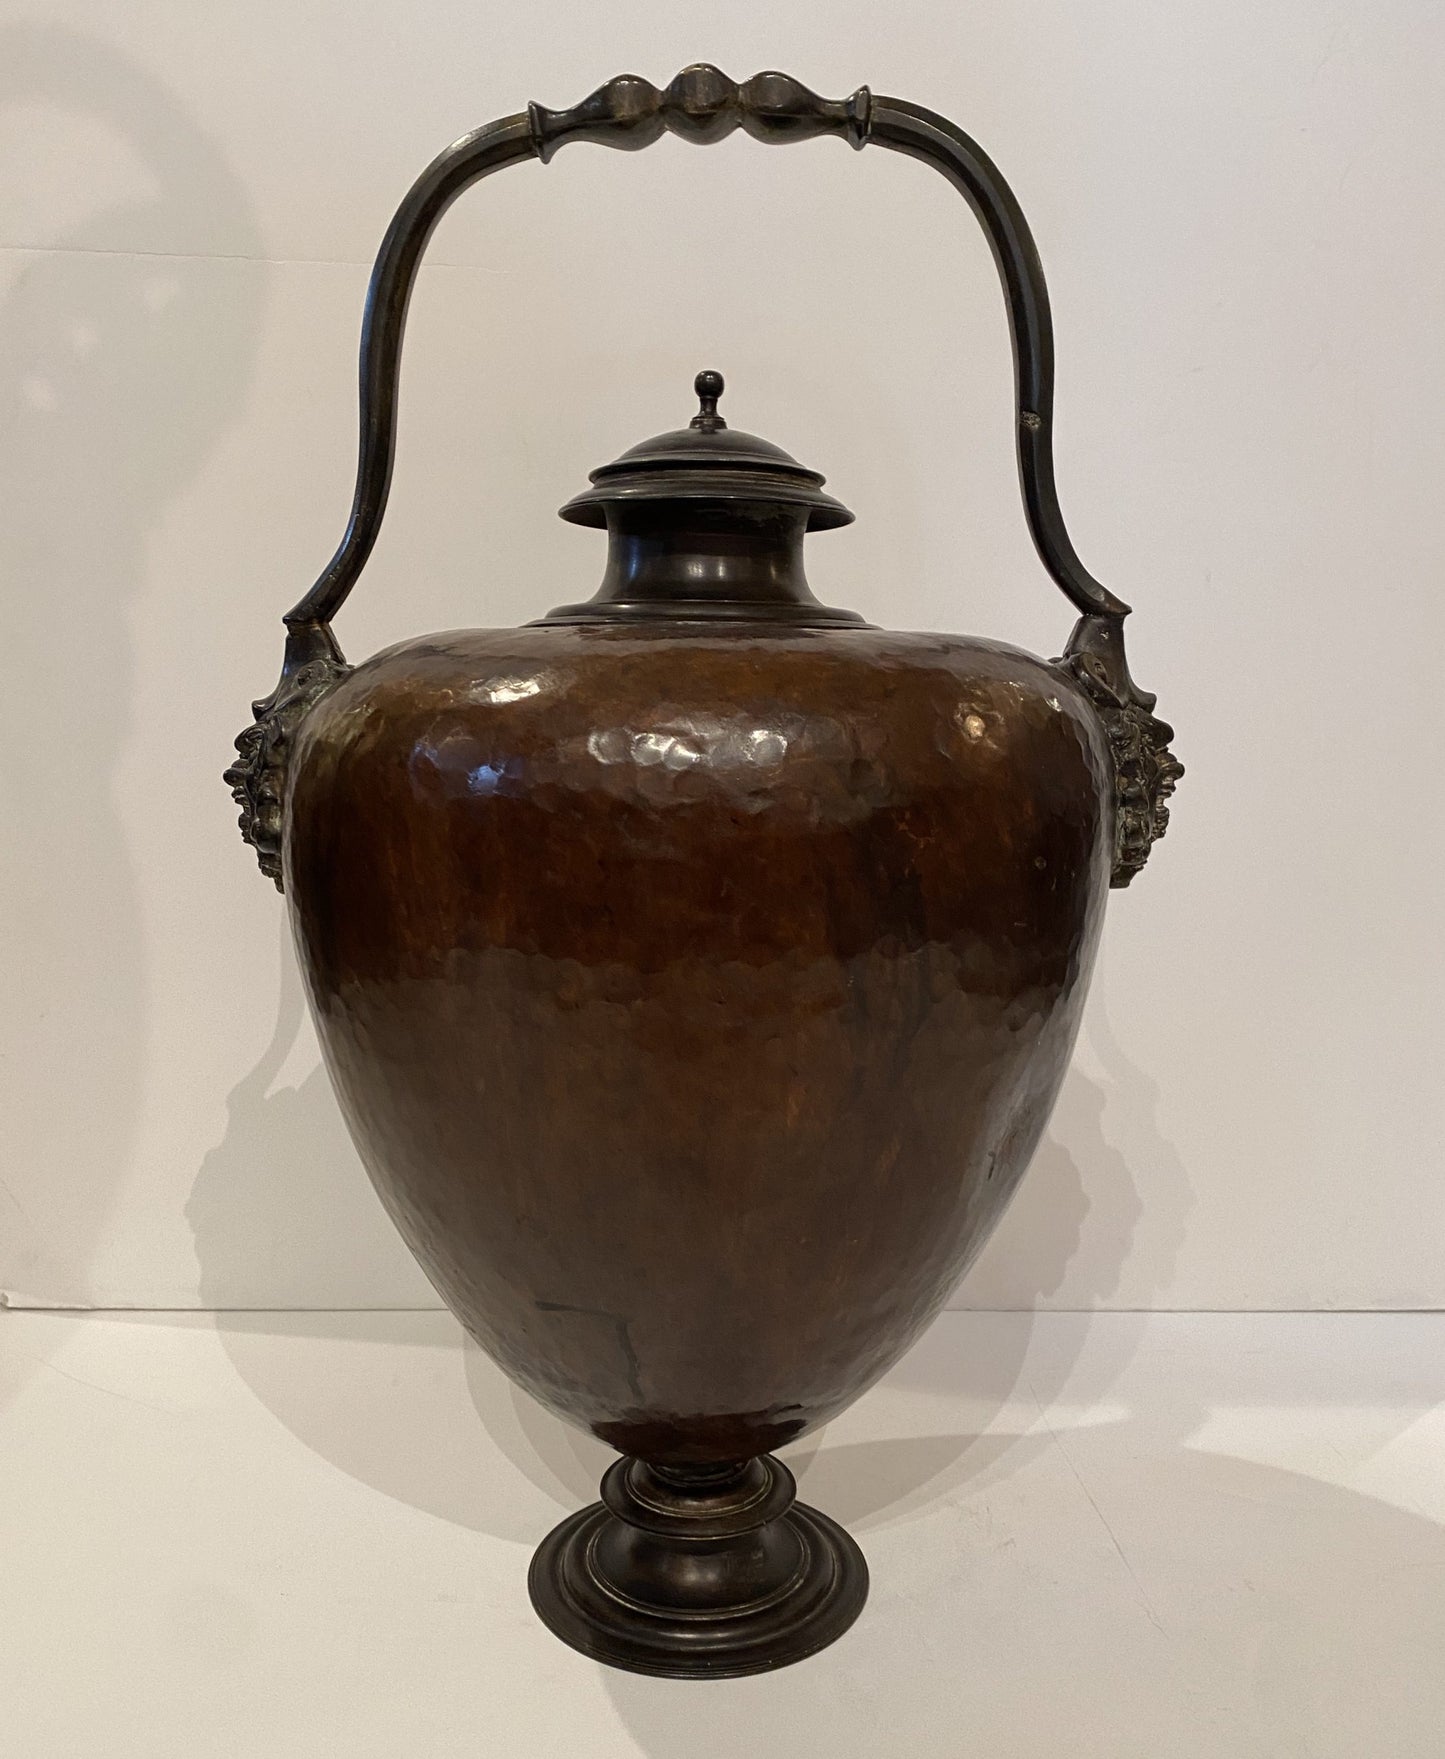 Copper and Bronze Ewer